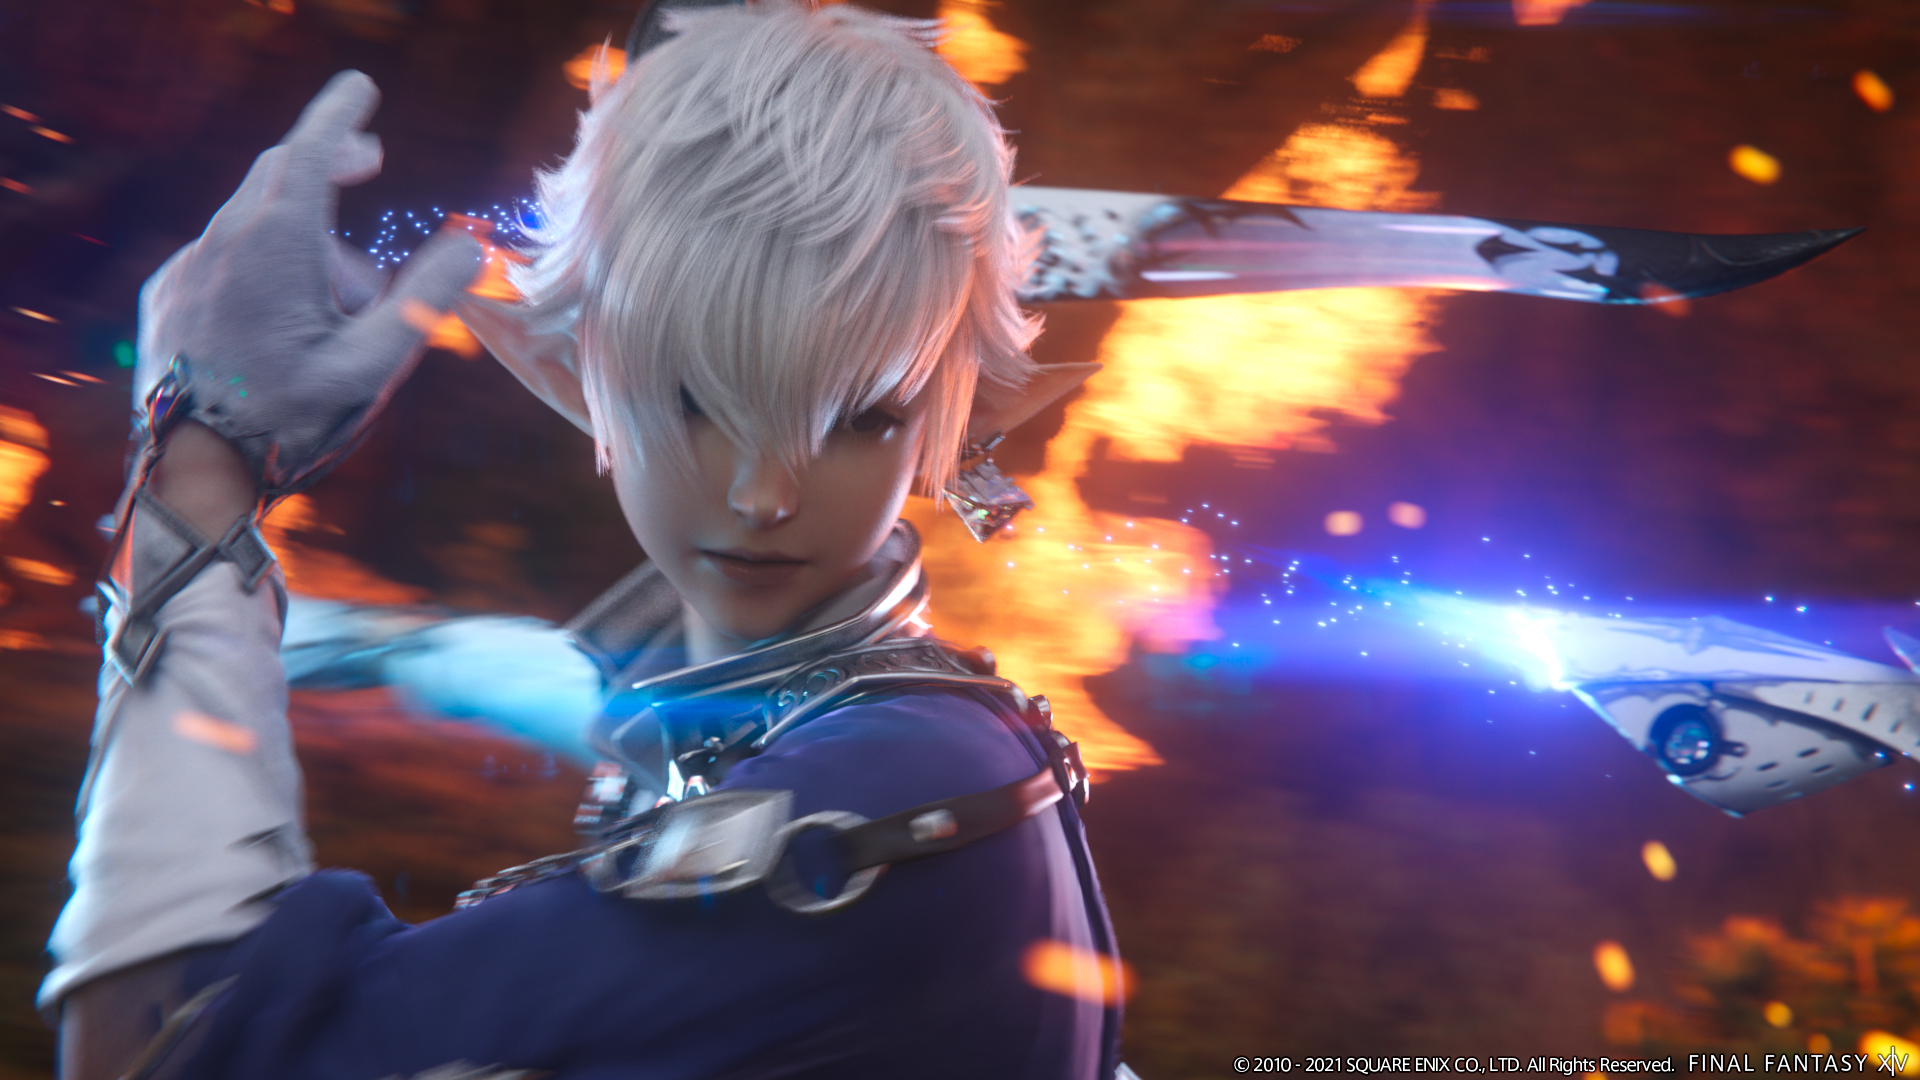 Final Fantasy 14: Endwalker carries Square Enix to a year of improved game sales